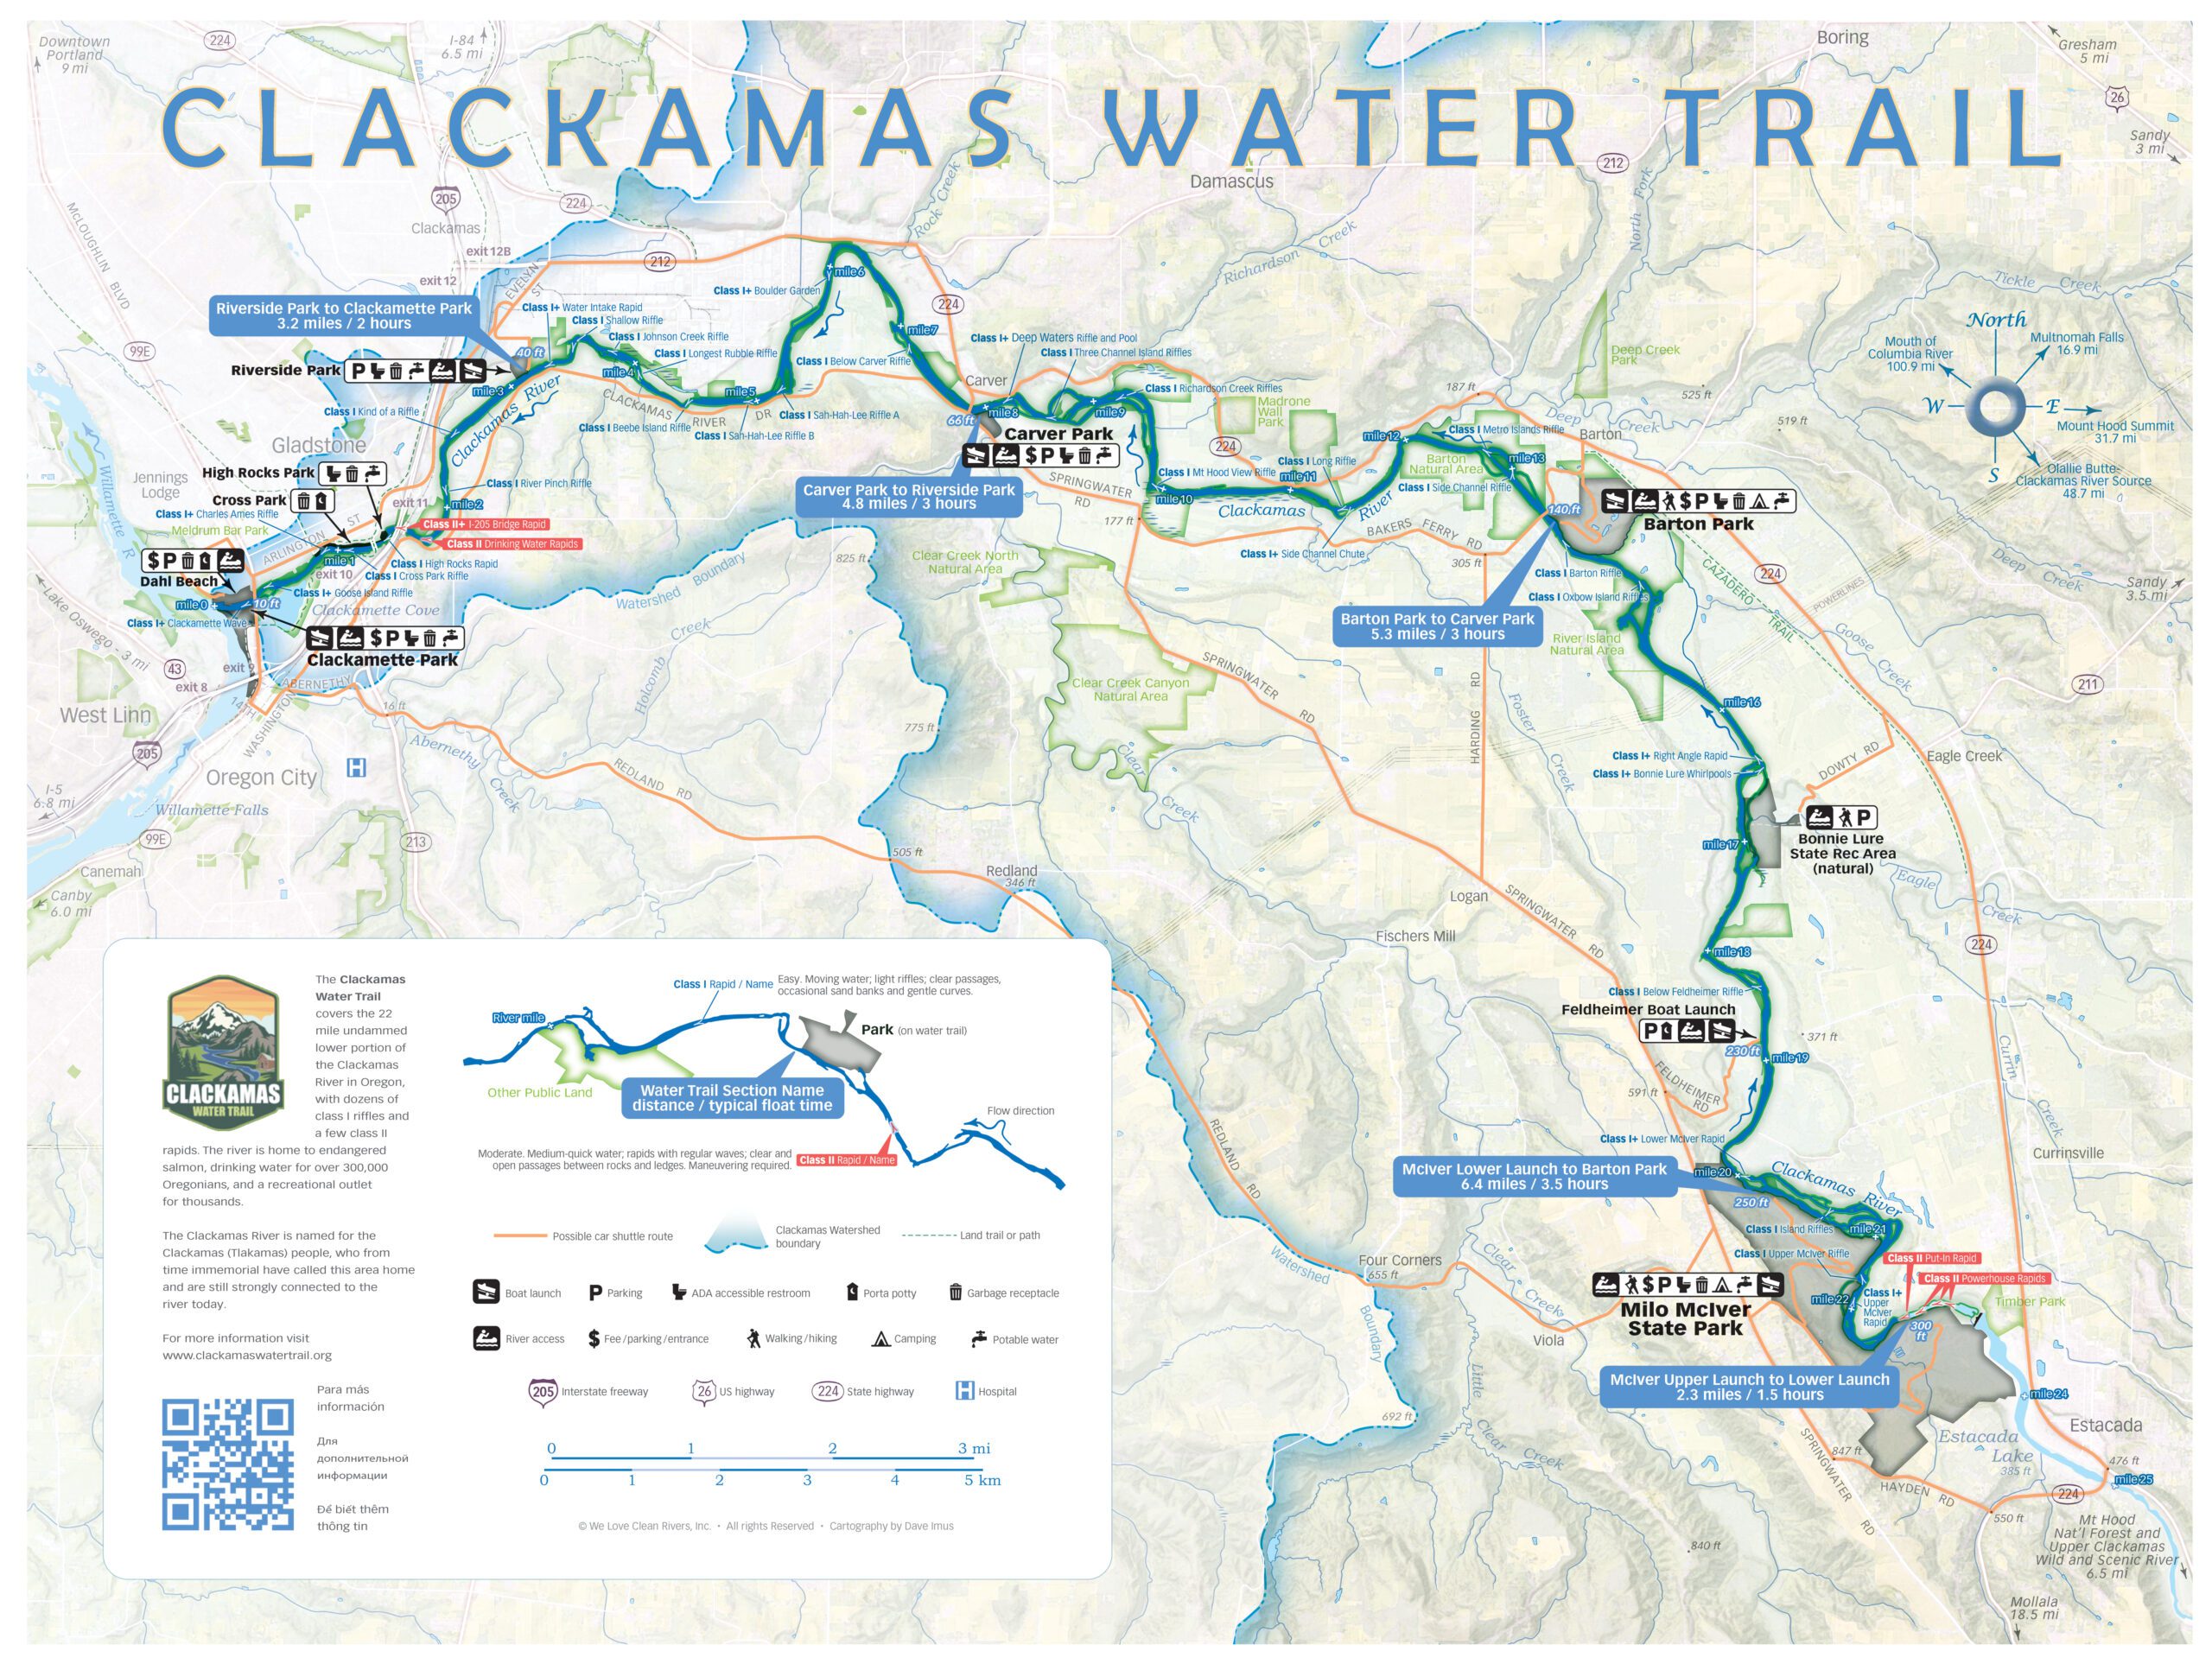 Clackamas Water Trail map - designed for signage at launches and other access points on the river.